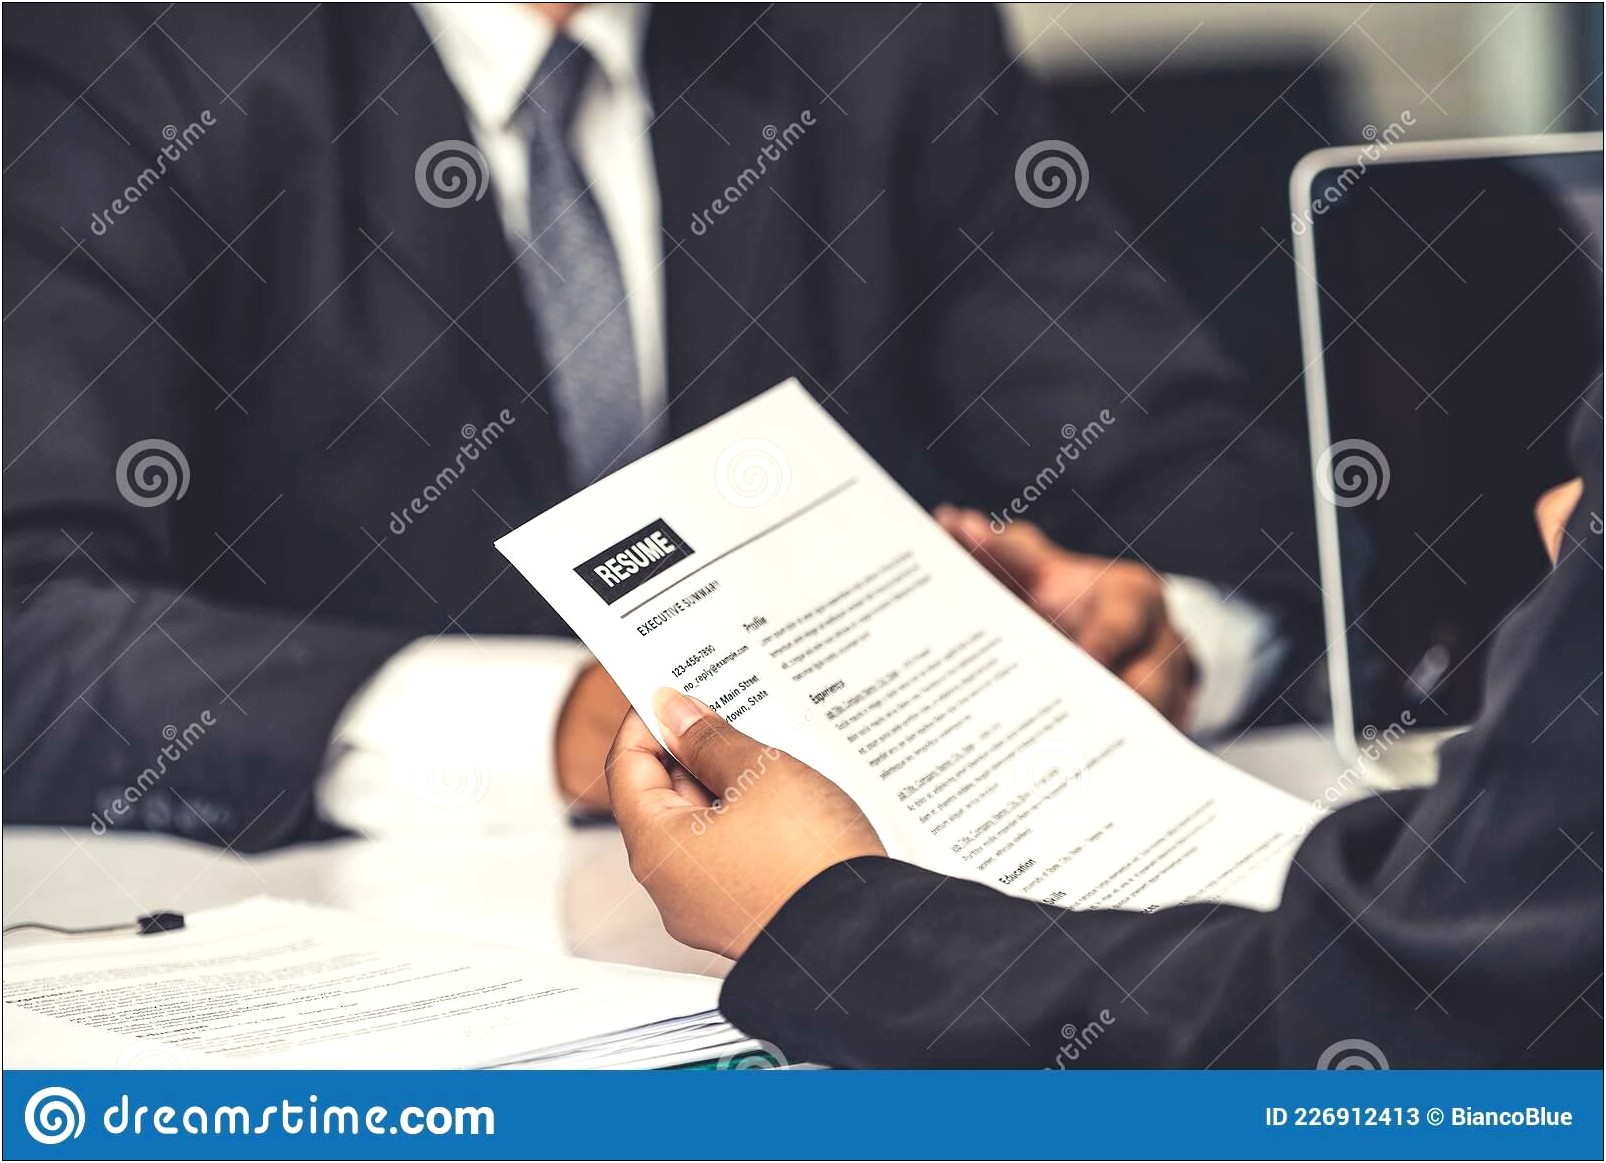 Do Human Resources Managers Read Resumes